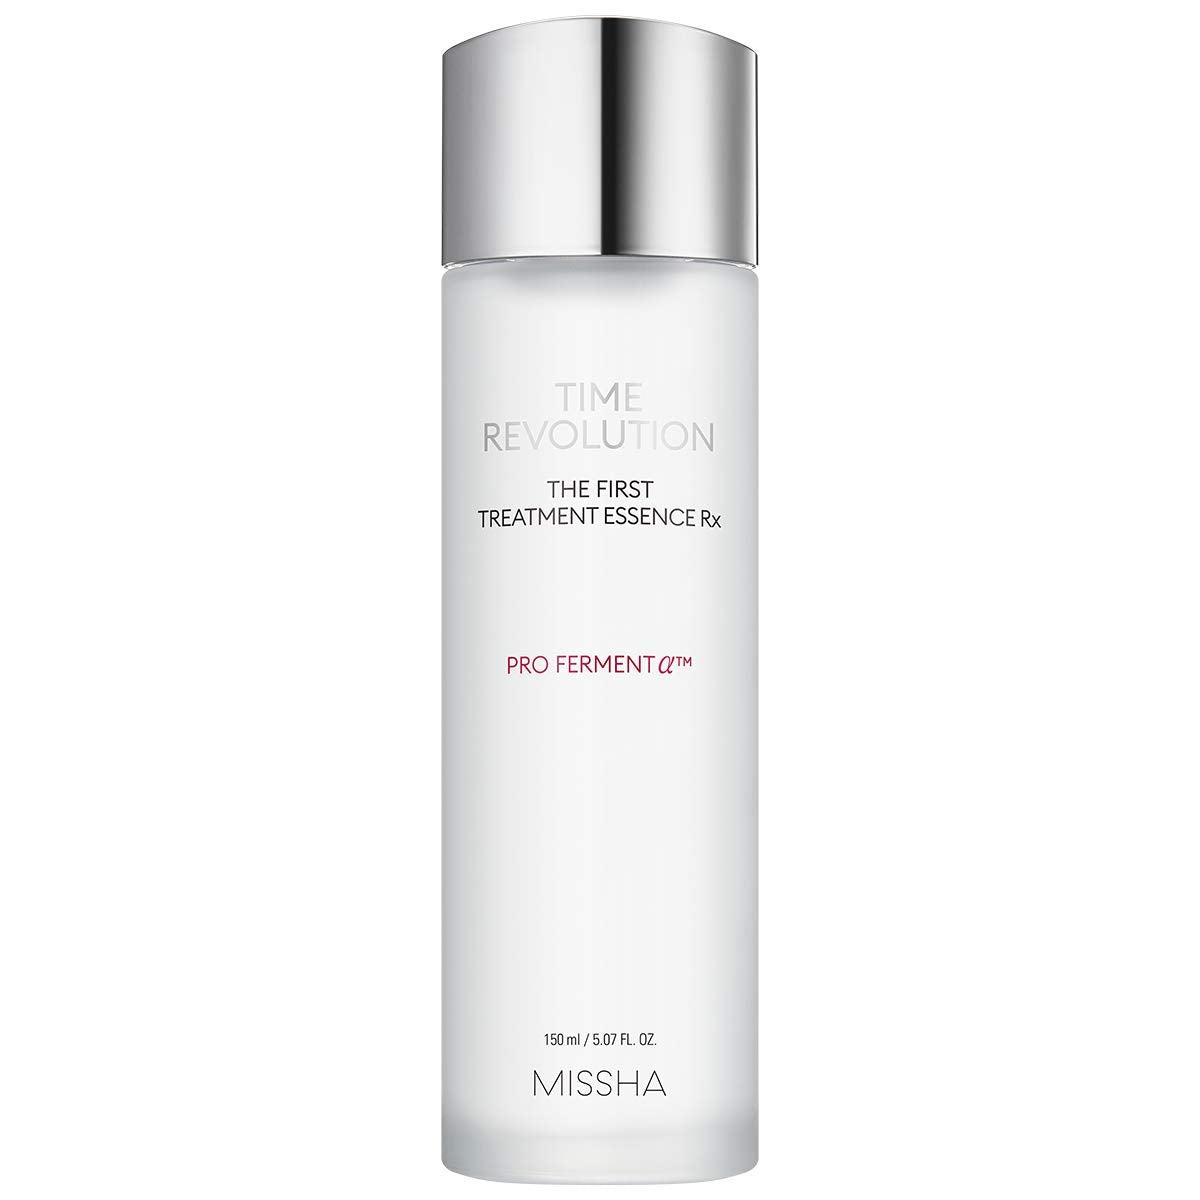 Time Revolution The First Treatment Essence Rx - Plump Shop